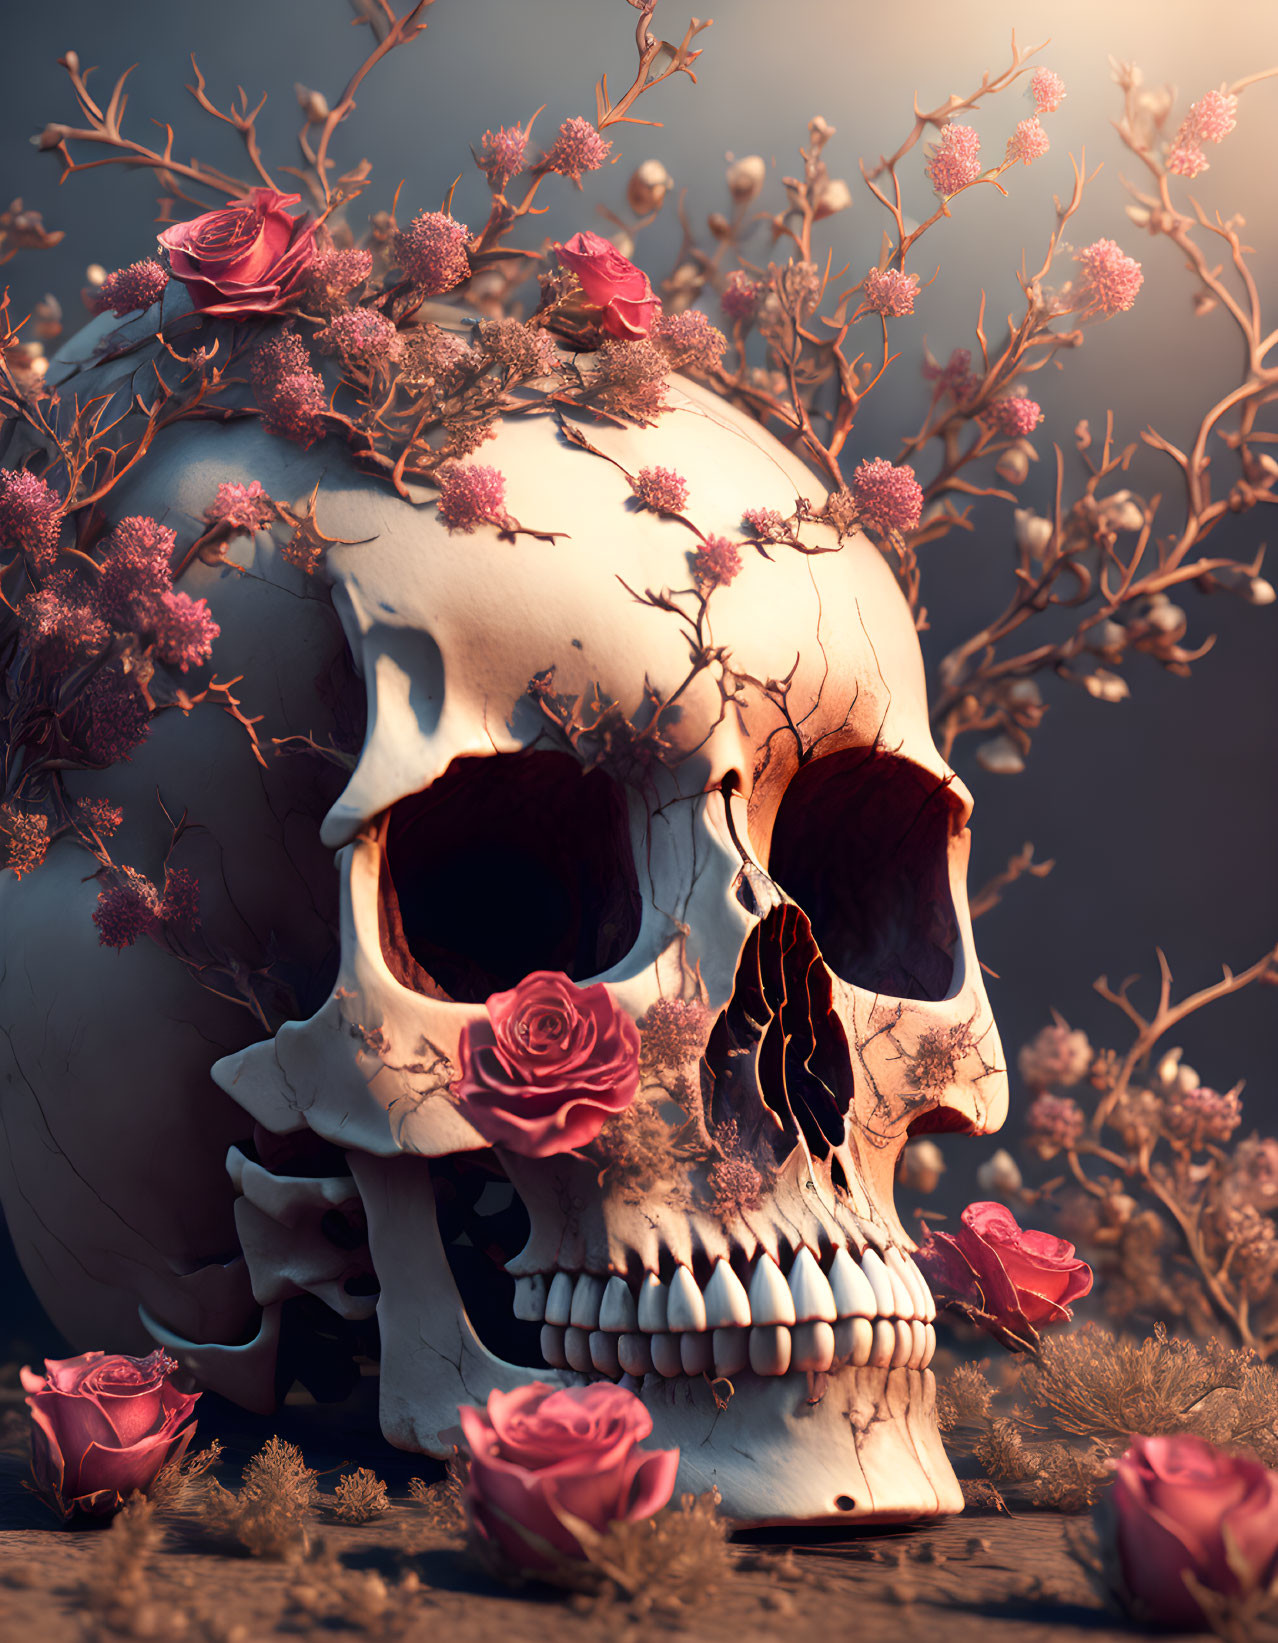 Skull with pink roses and flowers on moody backdrop with branches.